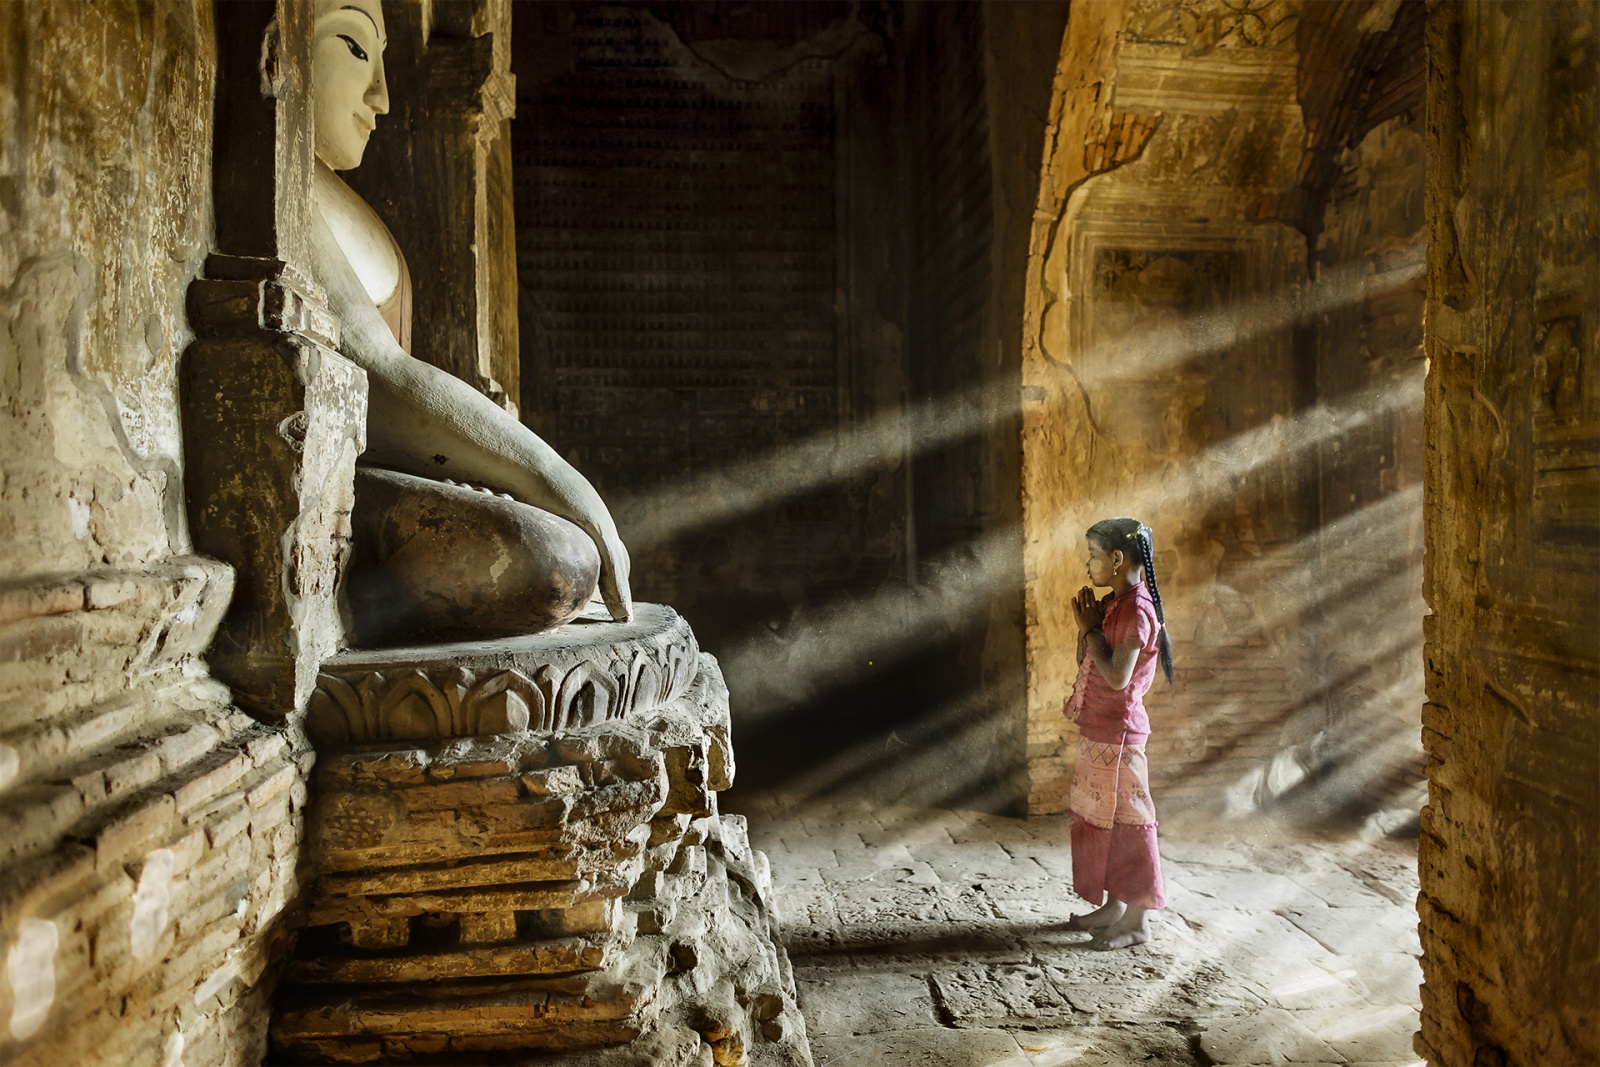 Bagan, Myanmar 2016 - From Portfolio of the Travel Photographer of the Year 2018 - Overall Winner
Honorable mention Category People, Lifestule ipa - INTERNATIONAL PHOTO AWARD - New York 2020
